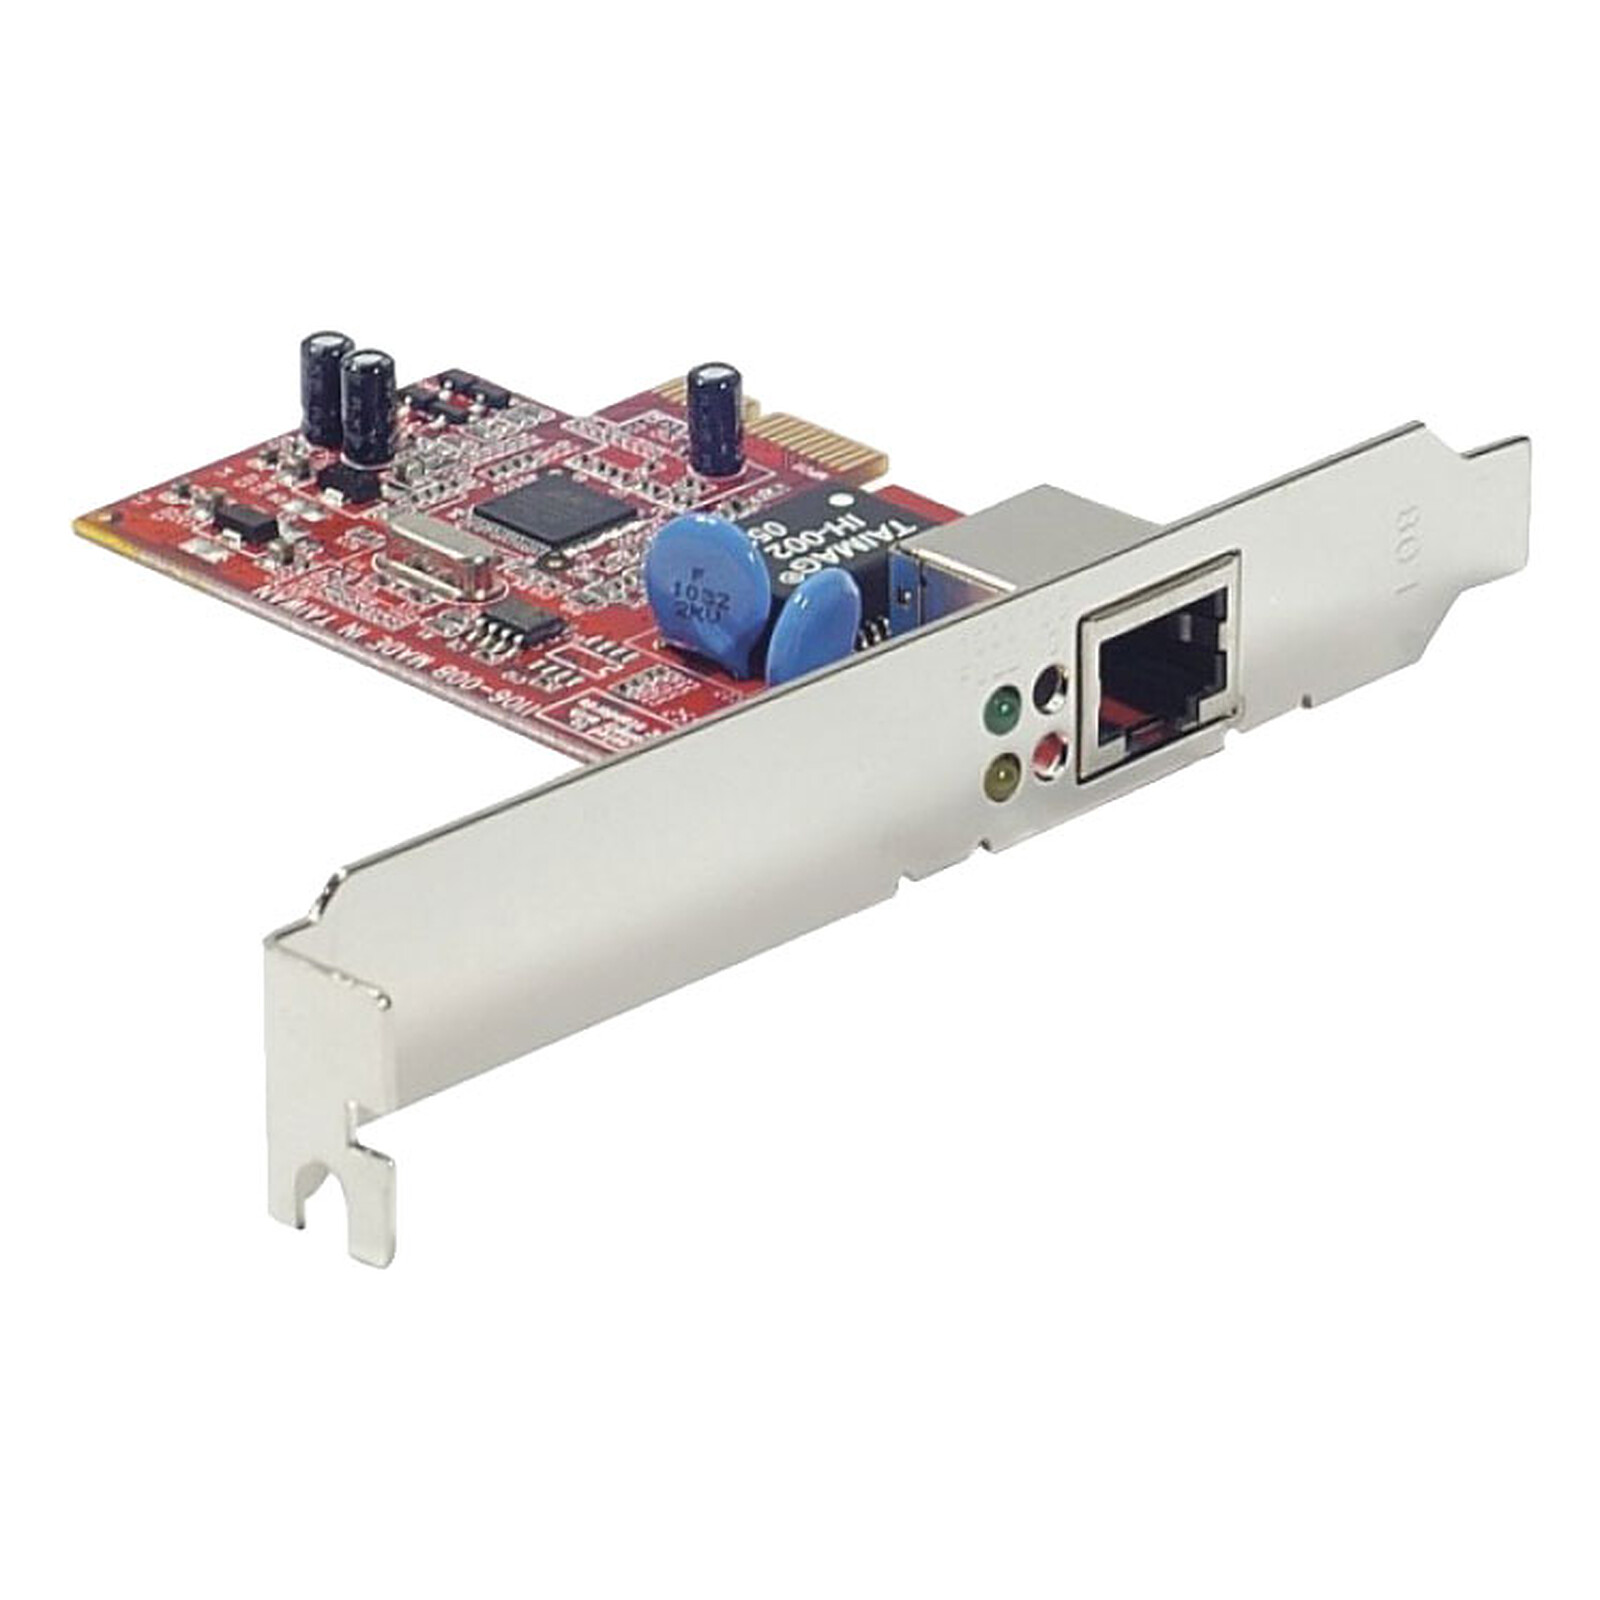 Сетевая карта DEXP [zh-ge1p] 10/100/1000 Mbps PCI-E X 1. Xl710-qda2. Сетевая карта PCI-E DEXP zh-ge1p. Ethernet converged Network Adapter xl710-qda2. Сетевая карта dexp